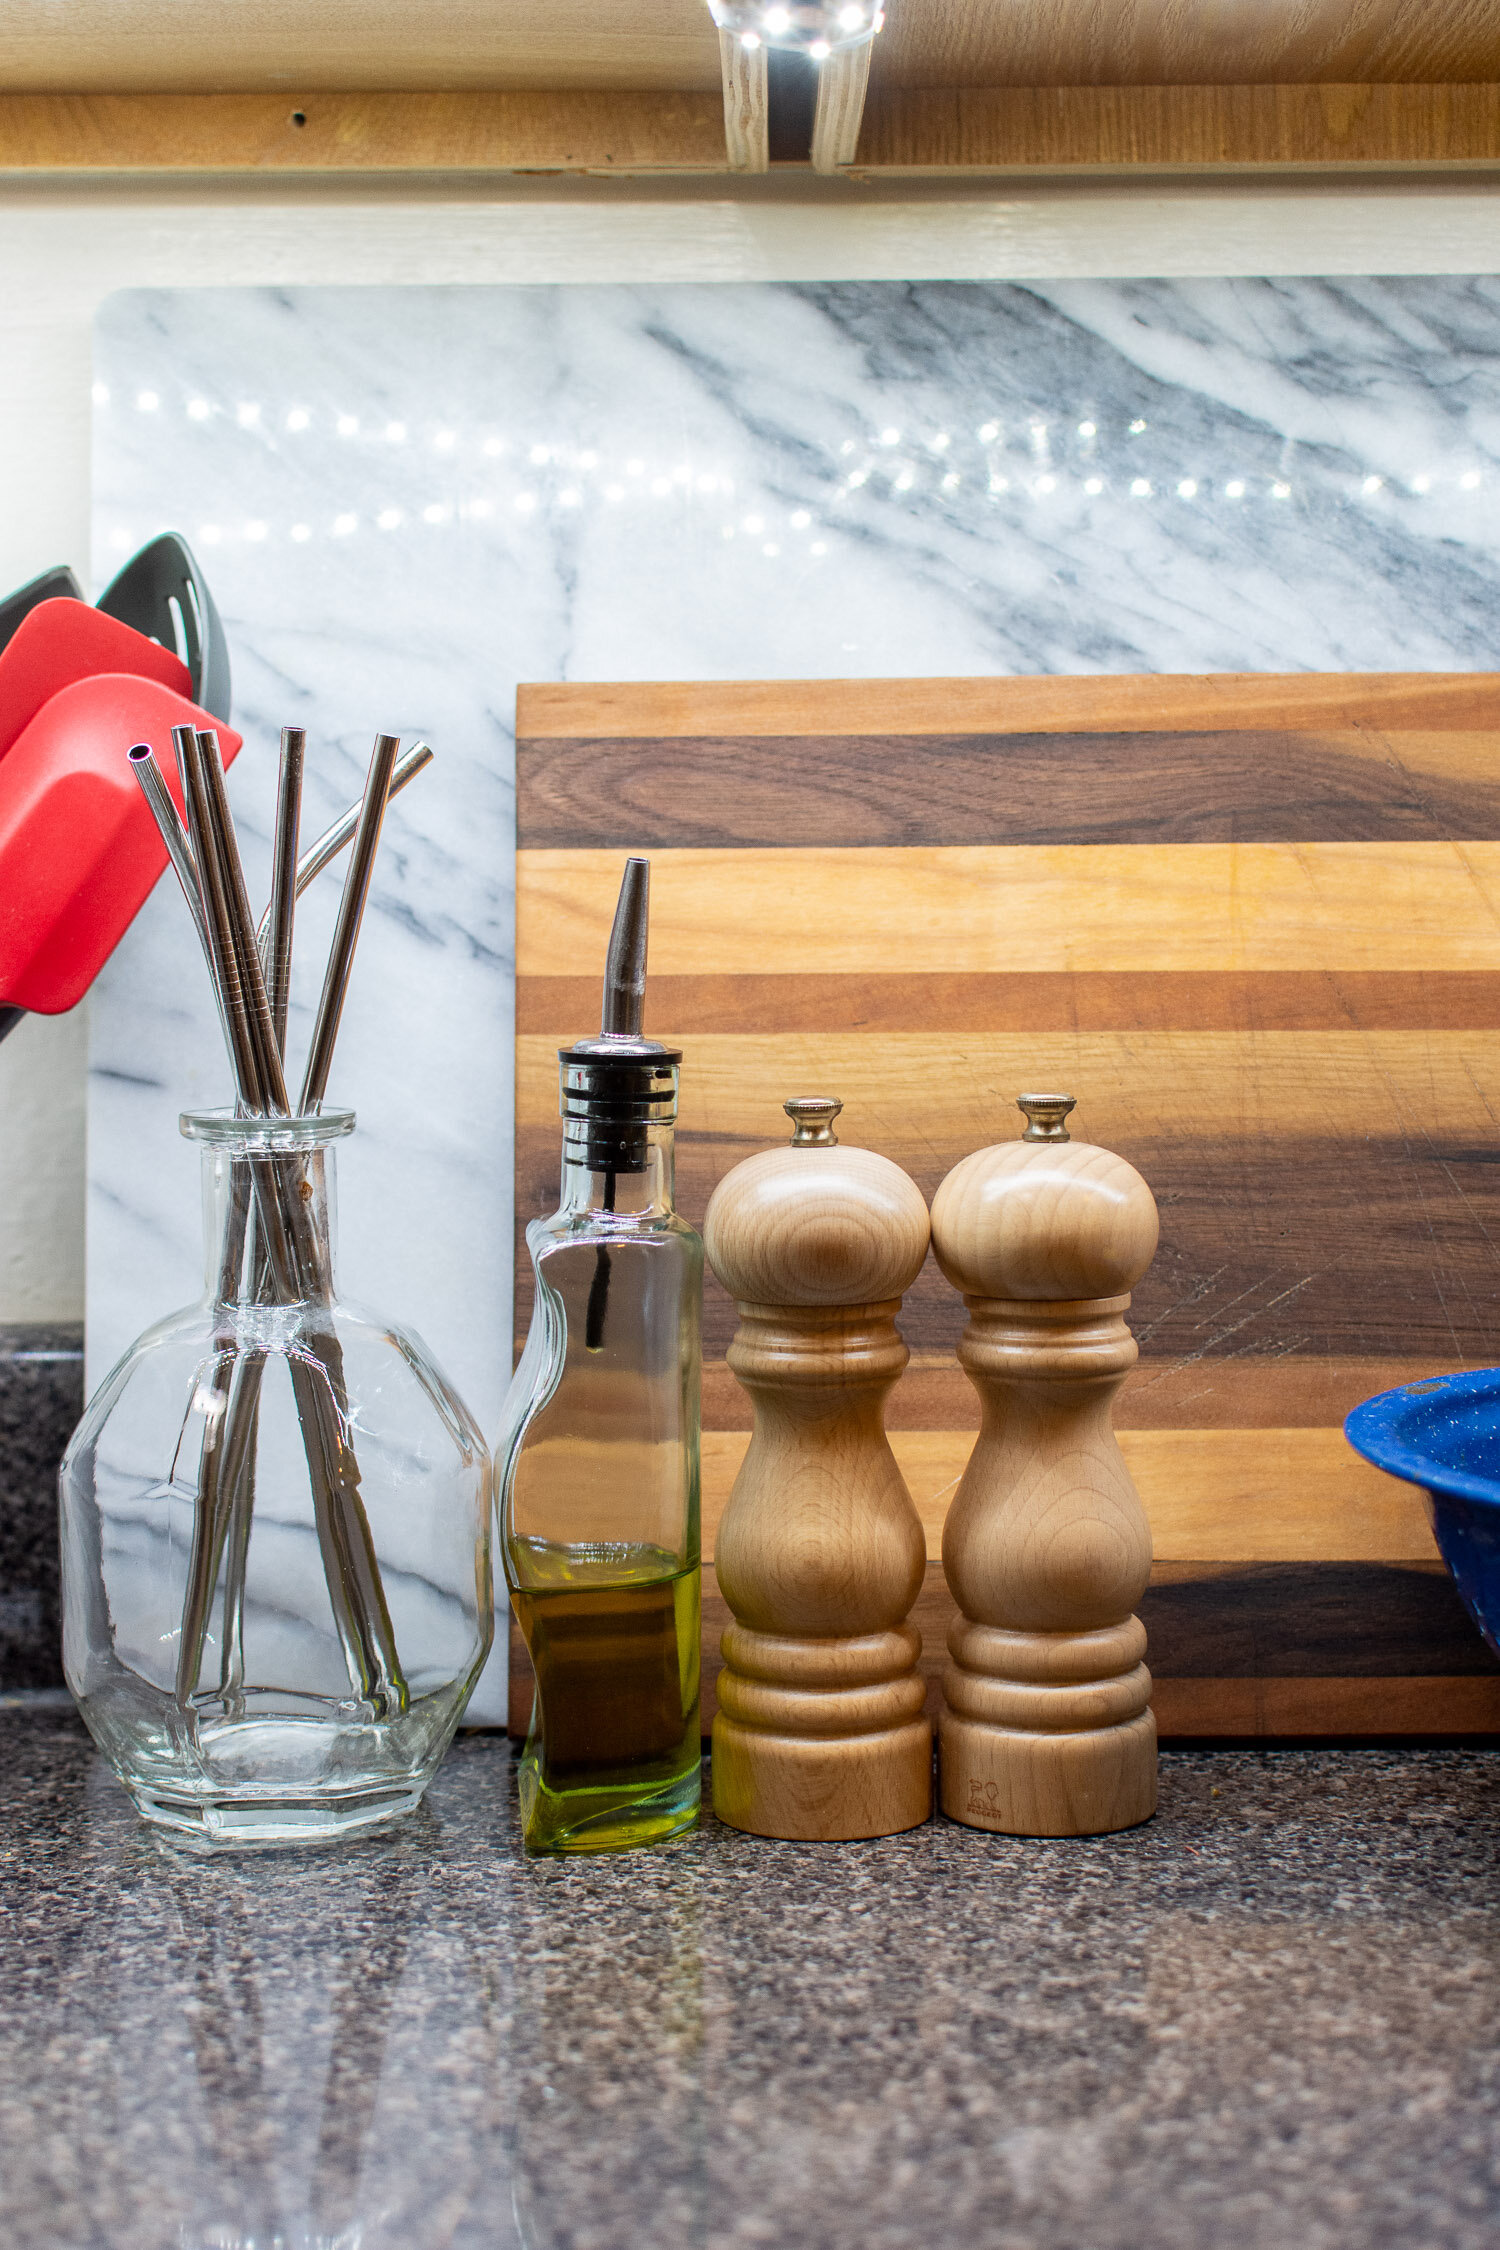 5 Kitchen accessories that prove you're not boring – SheKnows